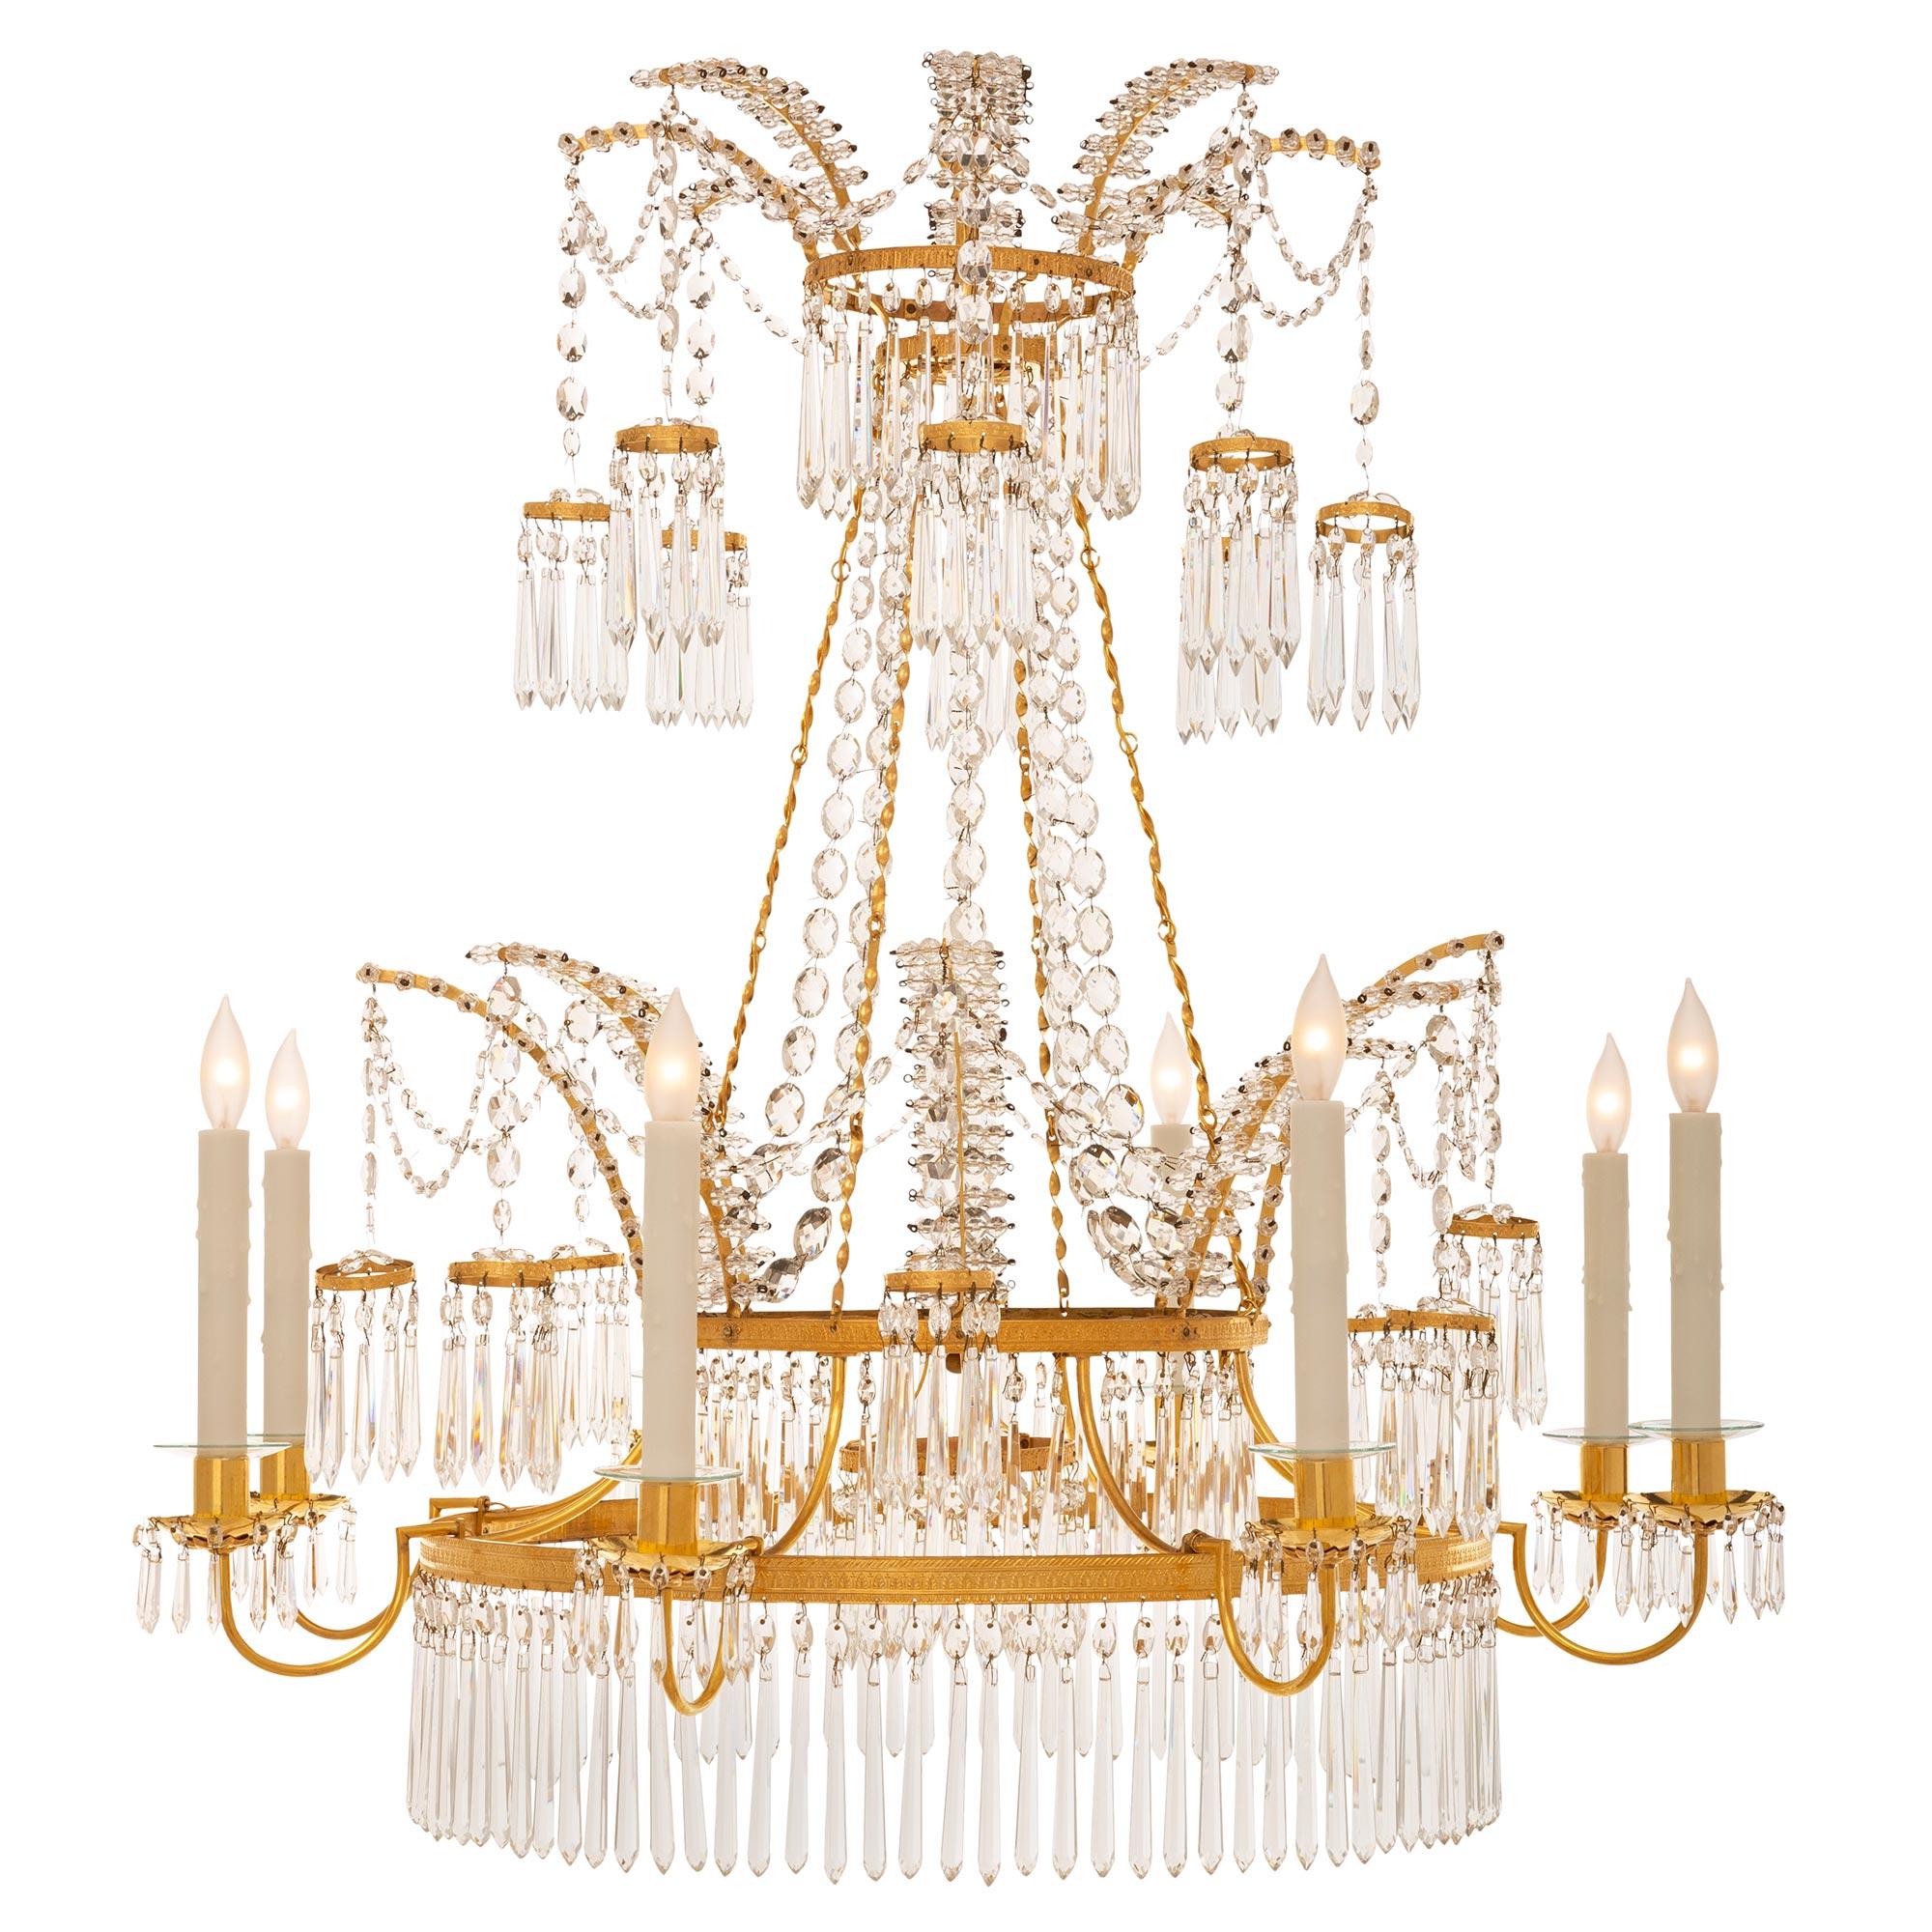 A stunning and extremely elegant Russian 19th century Neo-Classical st. ormolu, crystal, glass, and mirror chandelier. The eight arm chandelier displays a striking circular wrap around row of lovely prism shaped crystal pendants also repeated at the